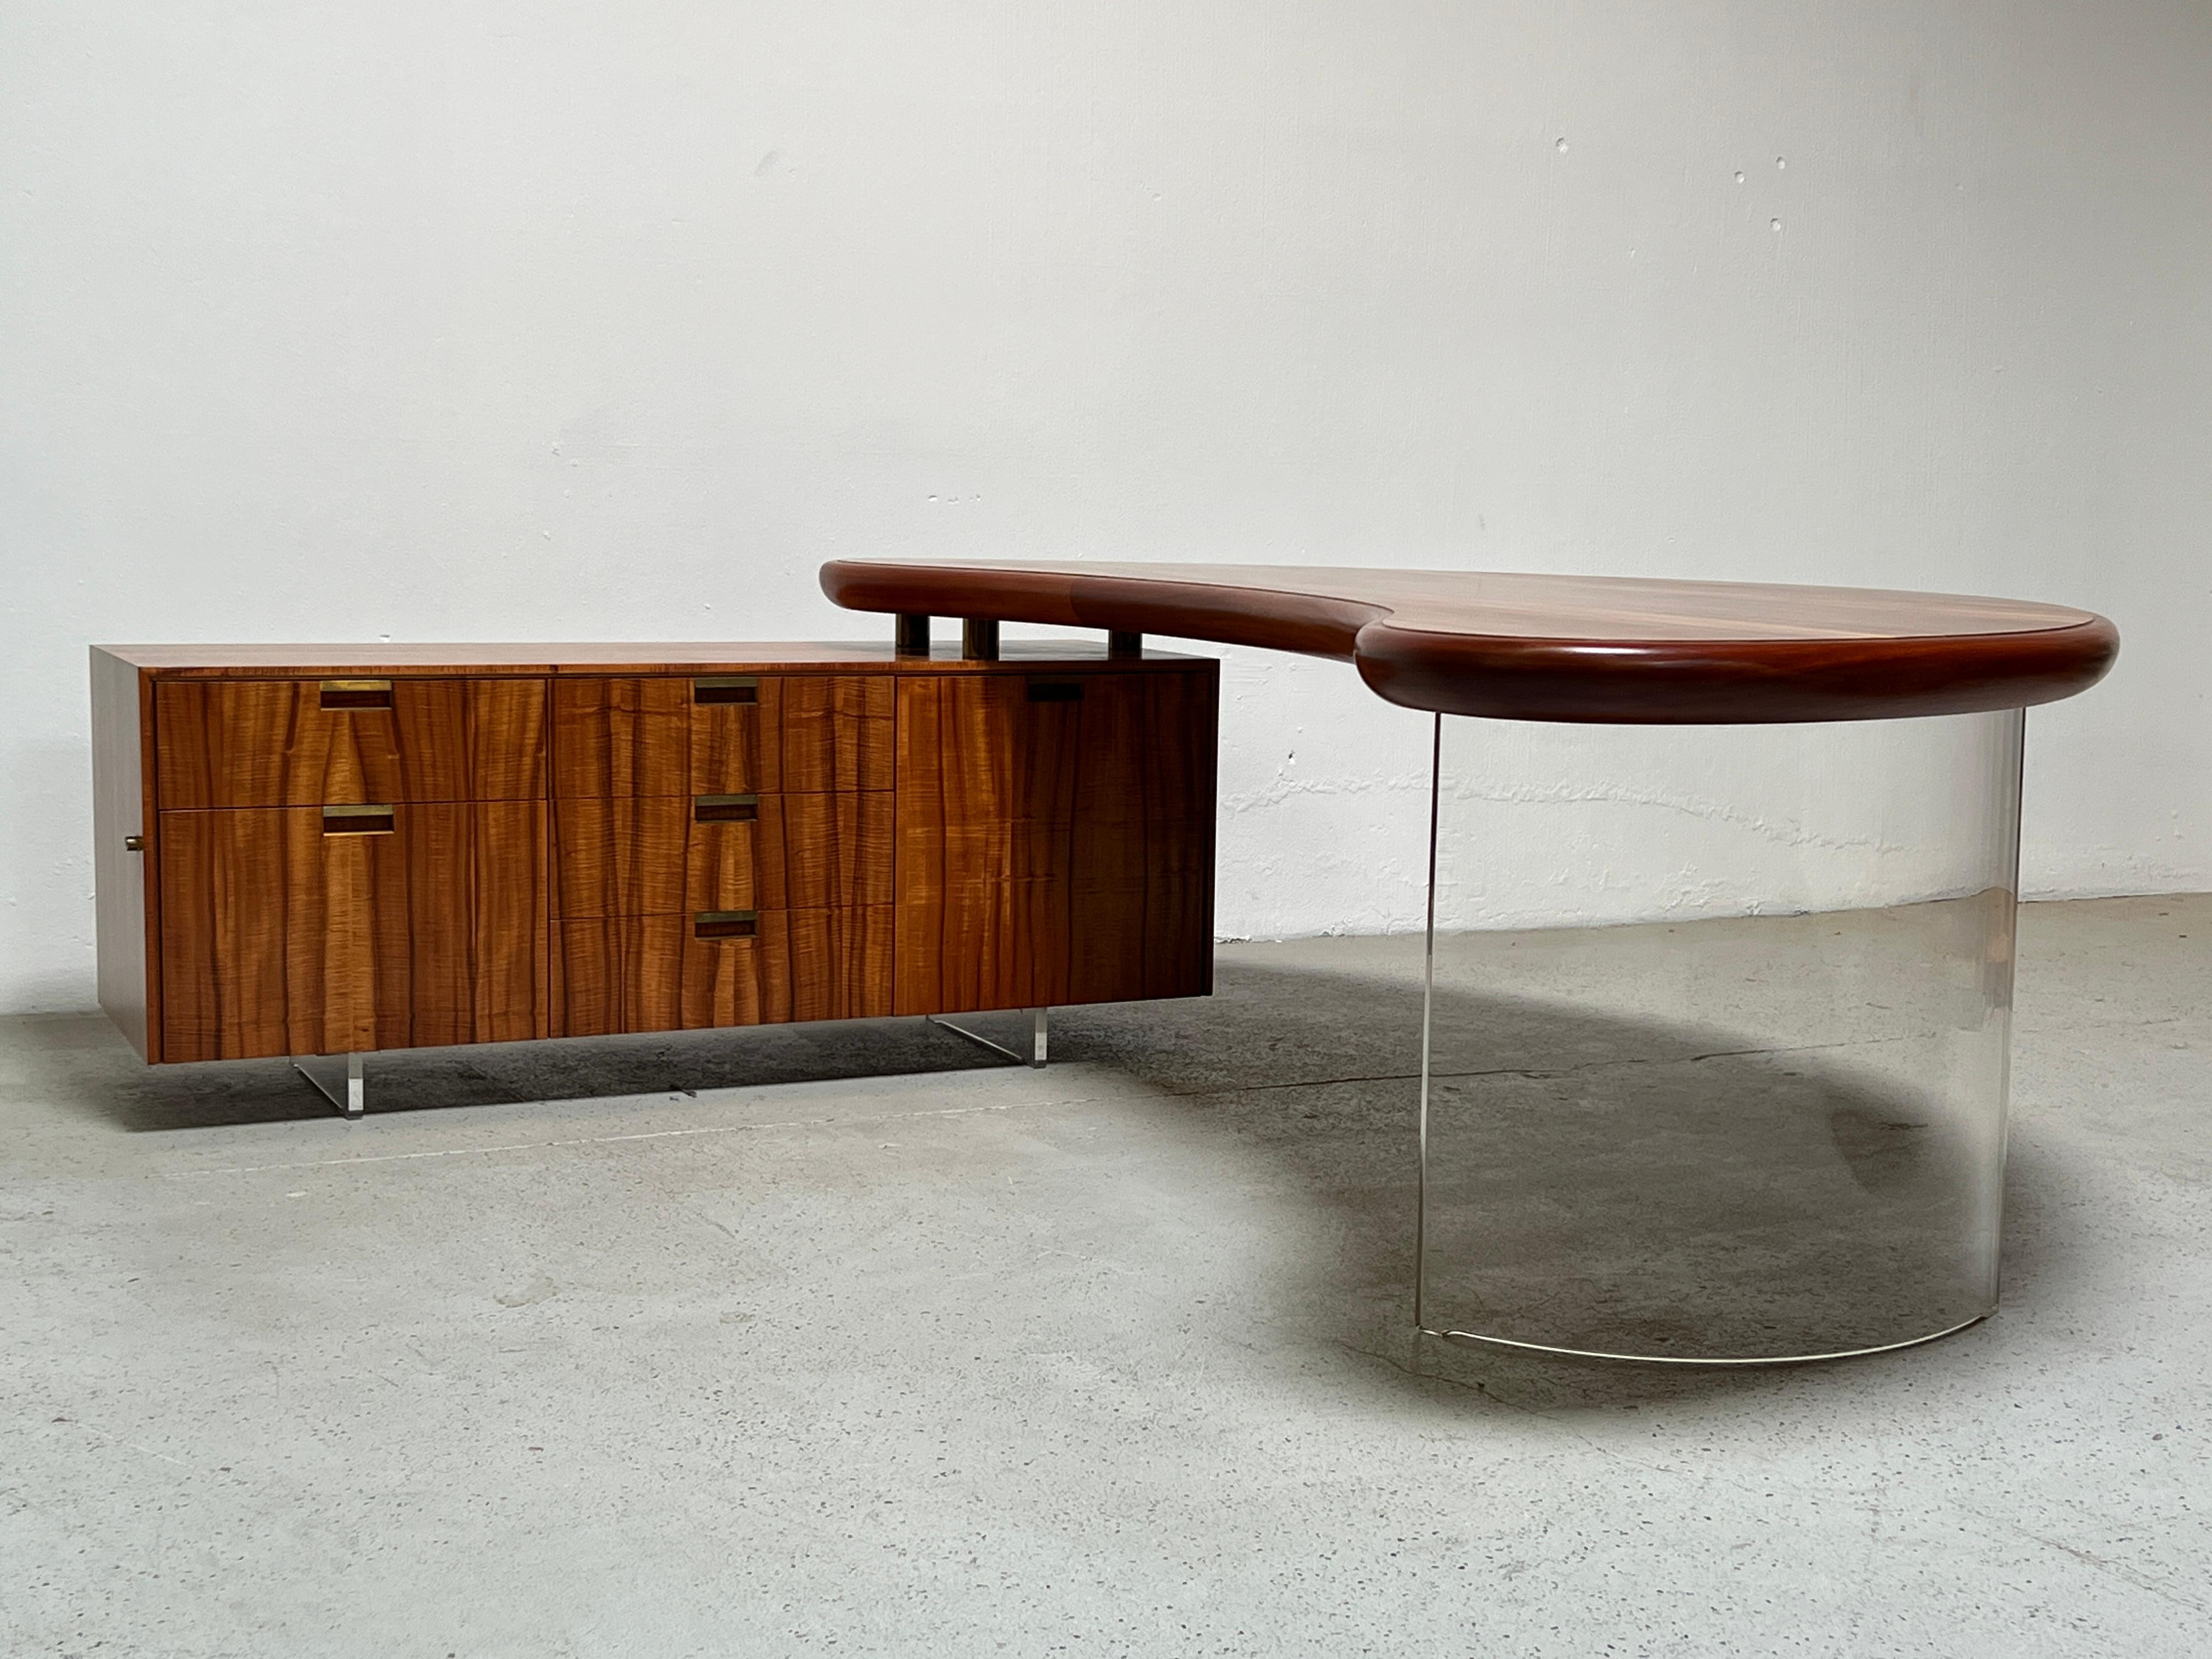  A large, executive desk designed by Vladimir Kagan. The Koa wood boomerang desk top floats on a curved lucite base. The return with bronze hardware and lucite runners as well.  Beautifully restored and ready for use. 